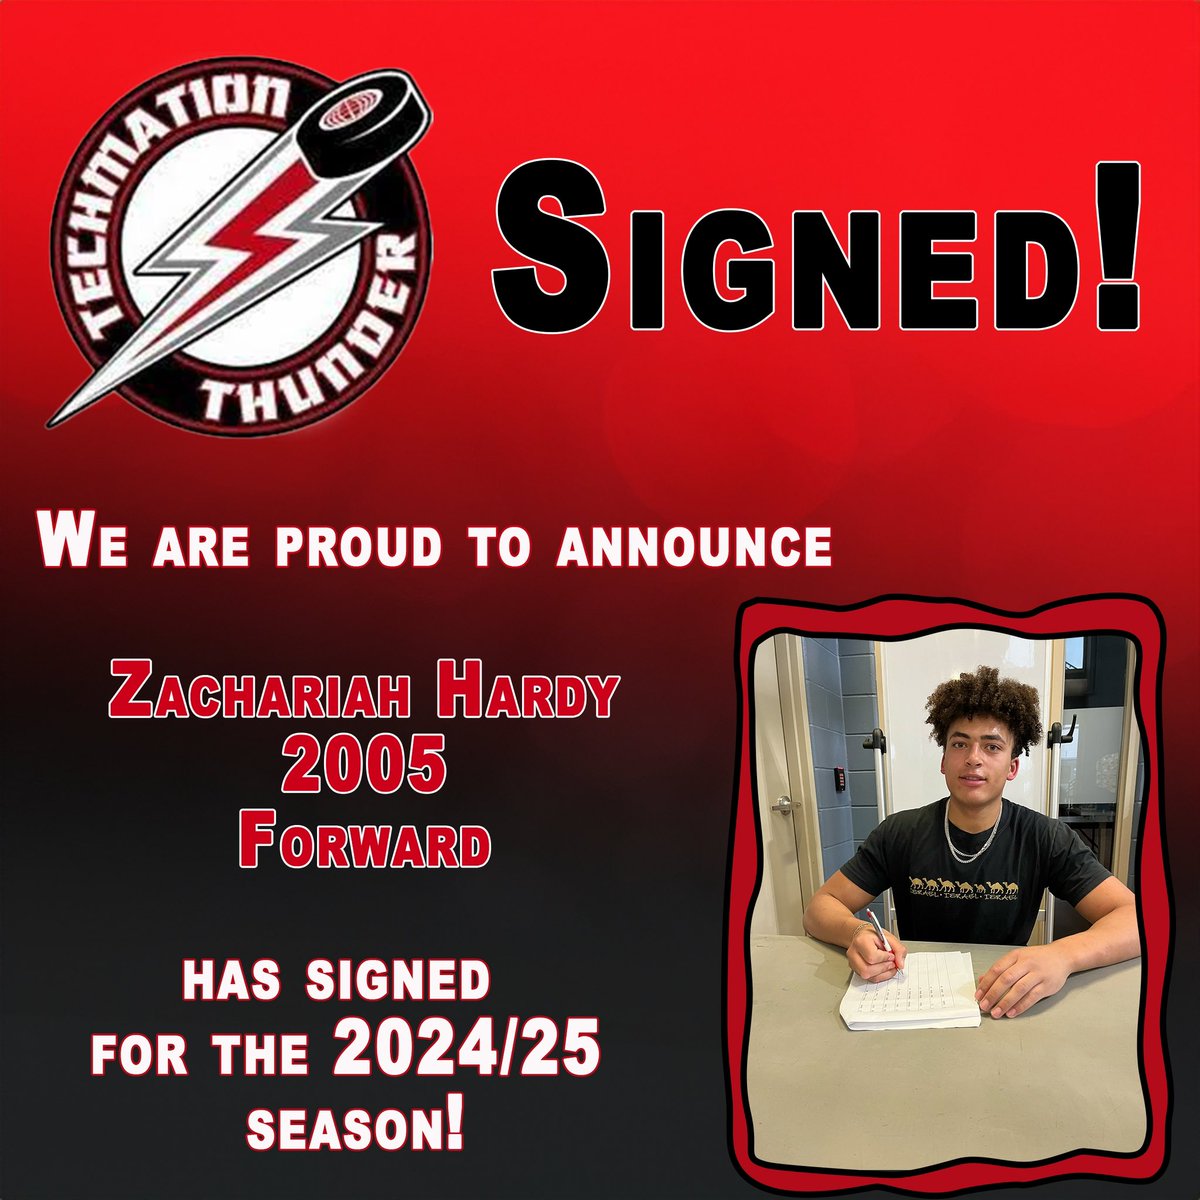 Welcome to the Thunder family, Zach! We are so excited to have you! #airdriethunder 🌩️🏒